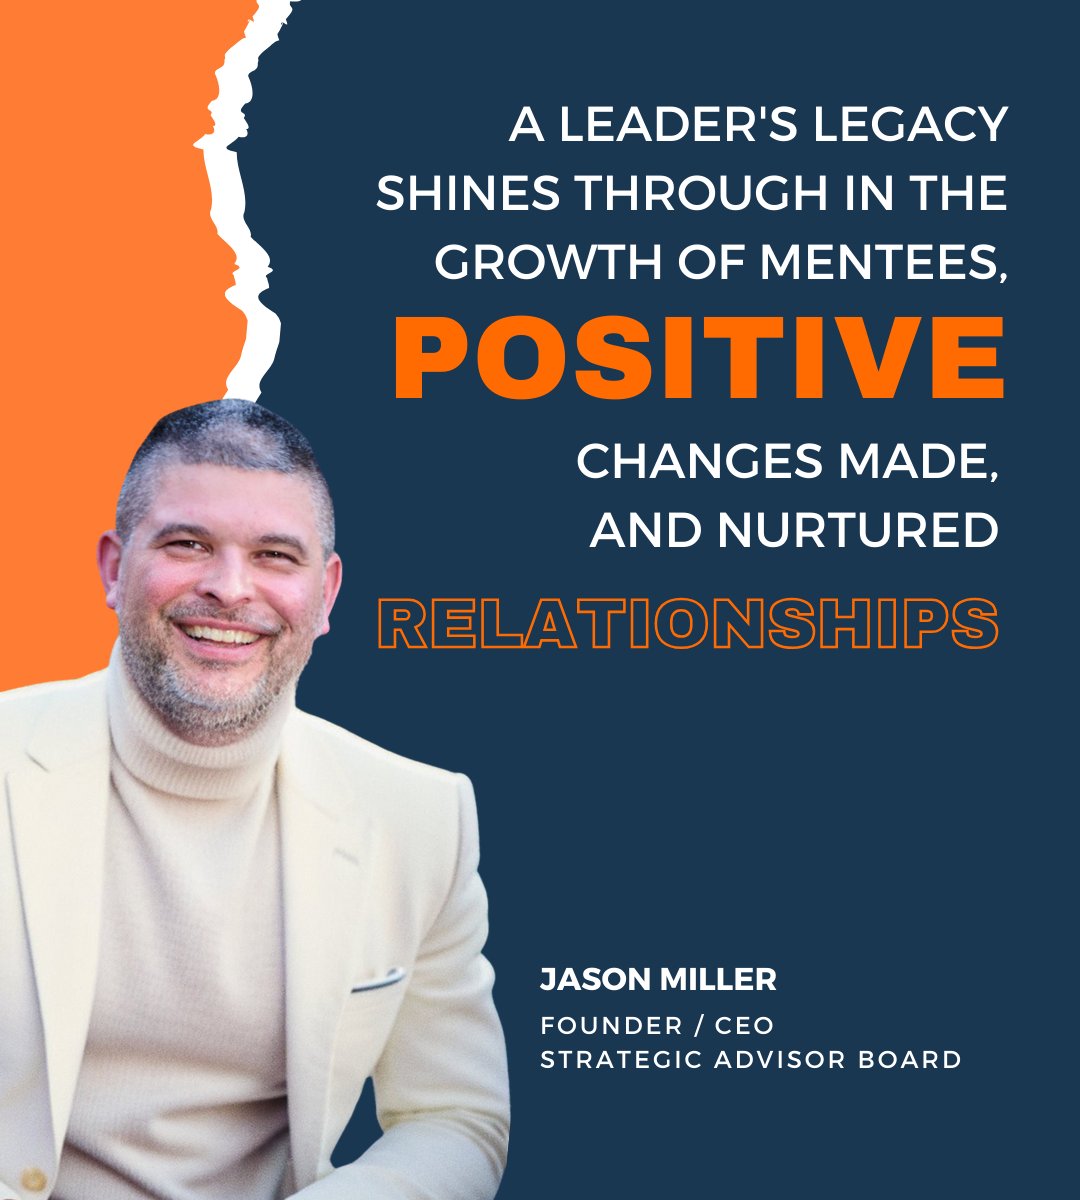 Our influence as leaders reverberates through generations, as those we've guided carry forth our wisdom and values.

#LeadershipLegacy #MentorshipMatters #PositiveChange #NurturingRelationships #Influence #Success #Guidance